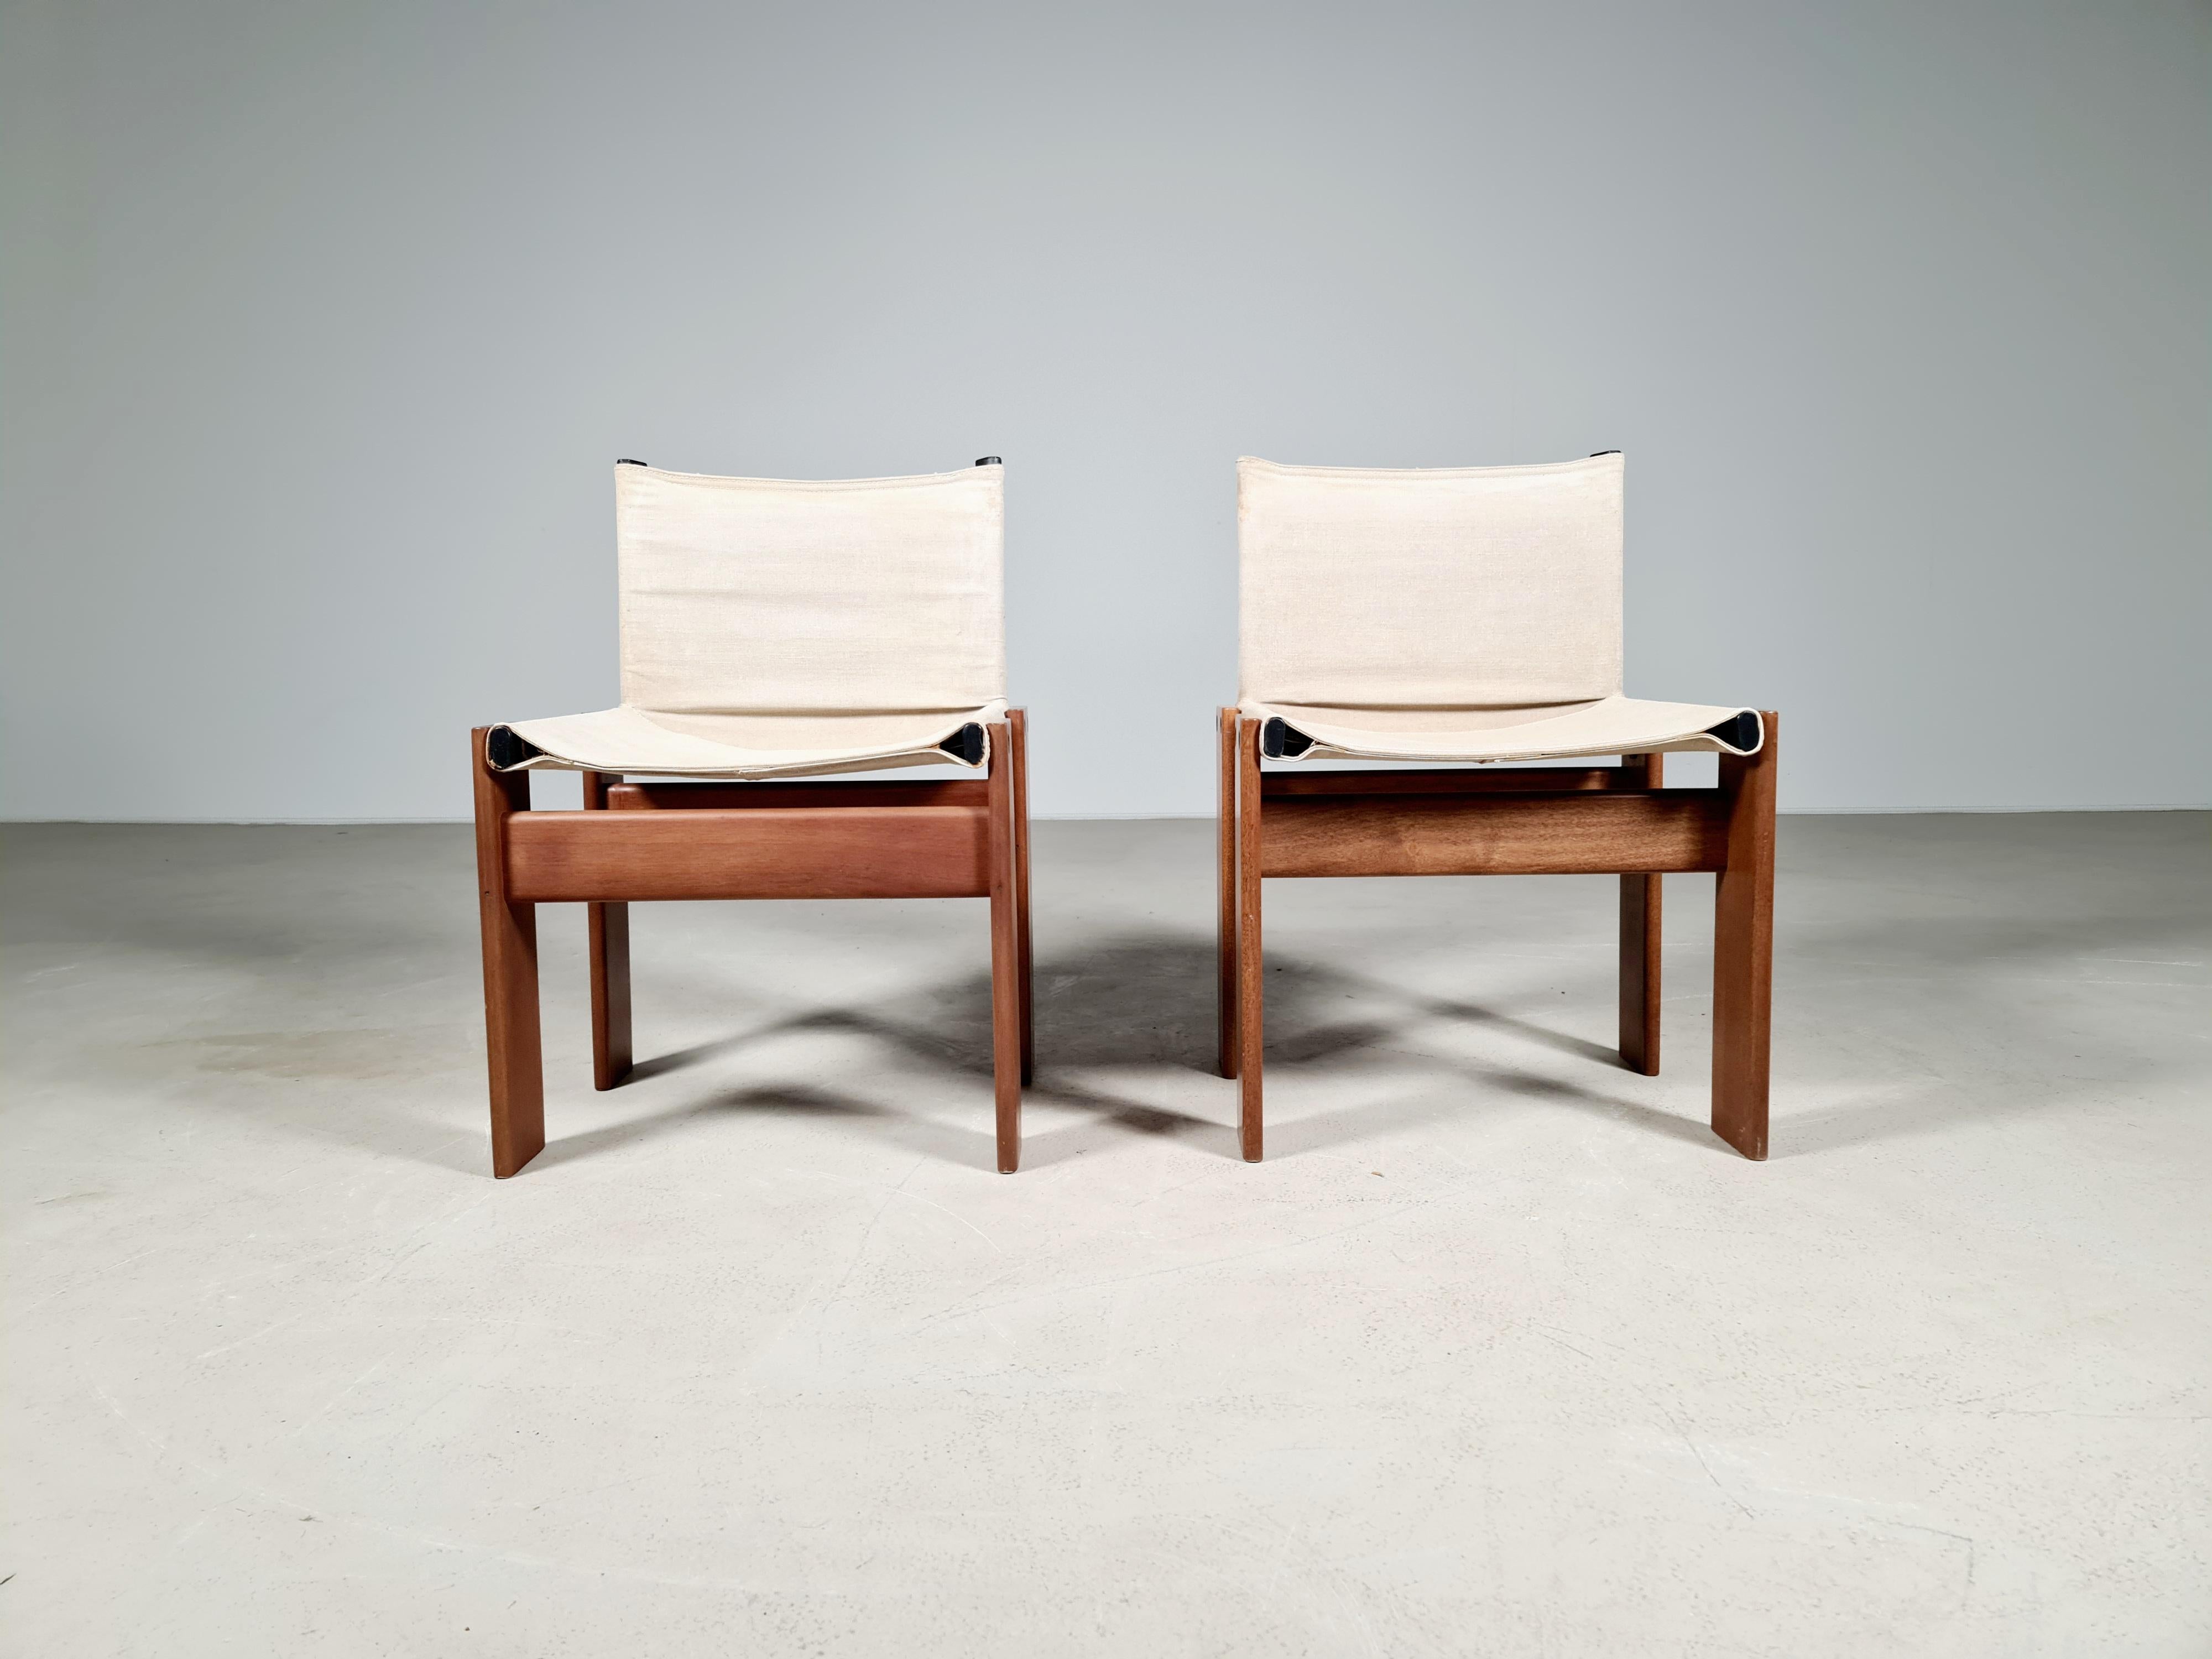 A set of 2 walnut and canvas dining chairs, model Monk, for Molteni, Italy, 1970s.
The light canvas forms a beautiful combination with the wood. An interesting and high-quality chair. Simple and solid design by Italian award-winning designers